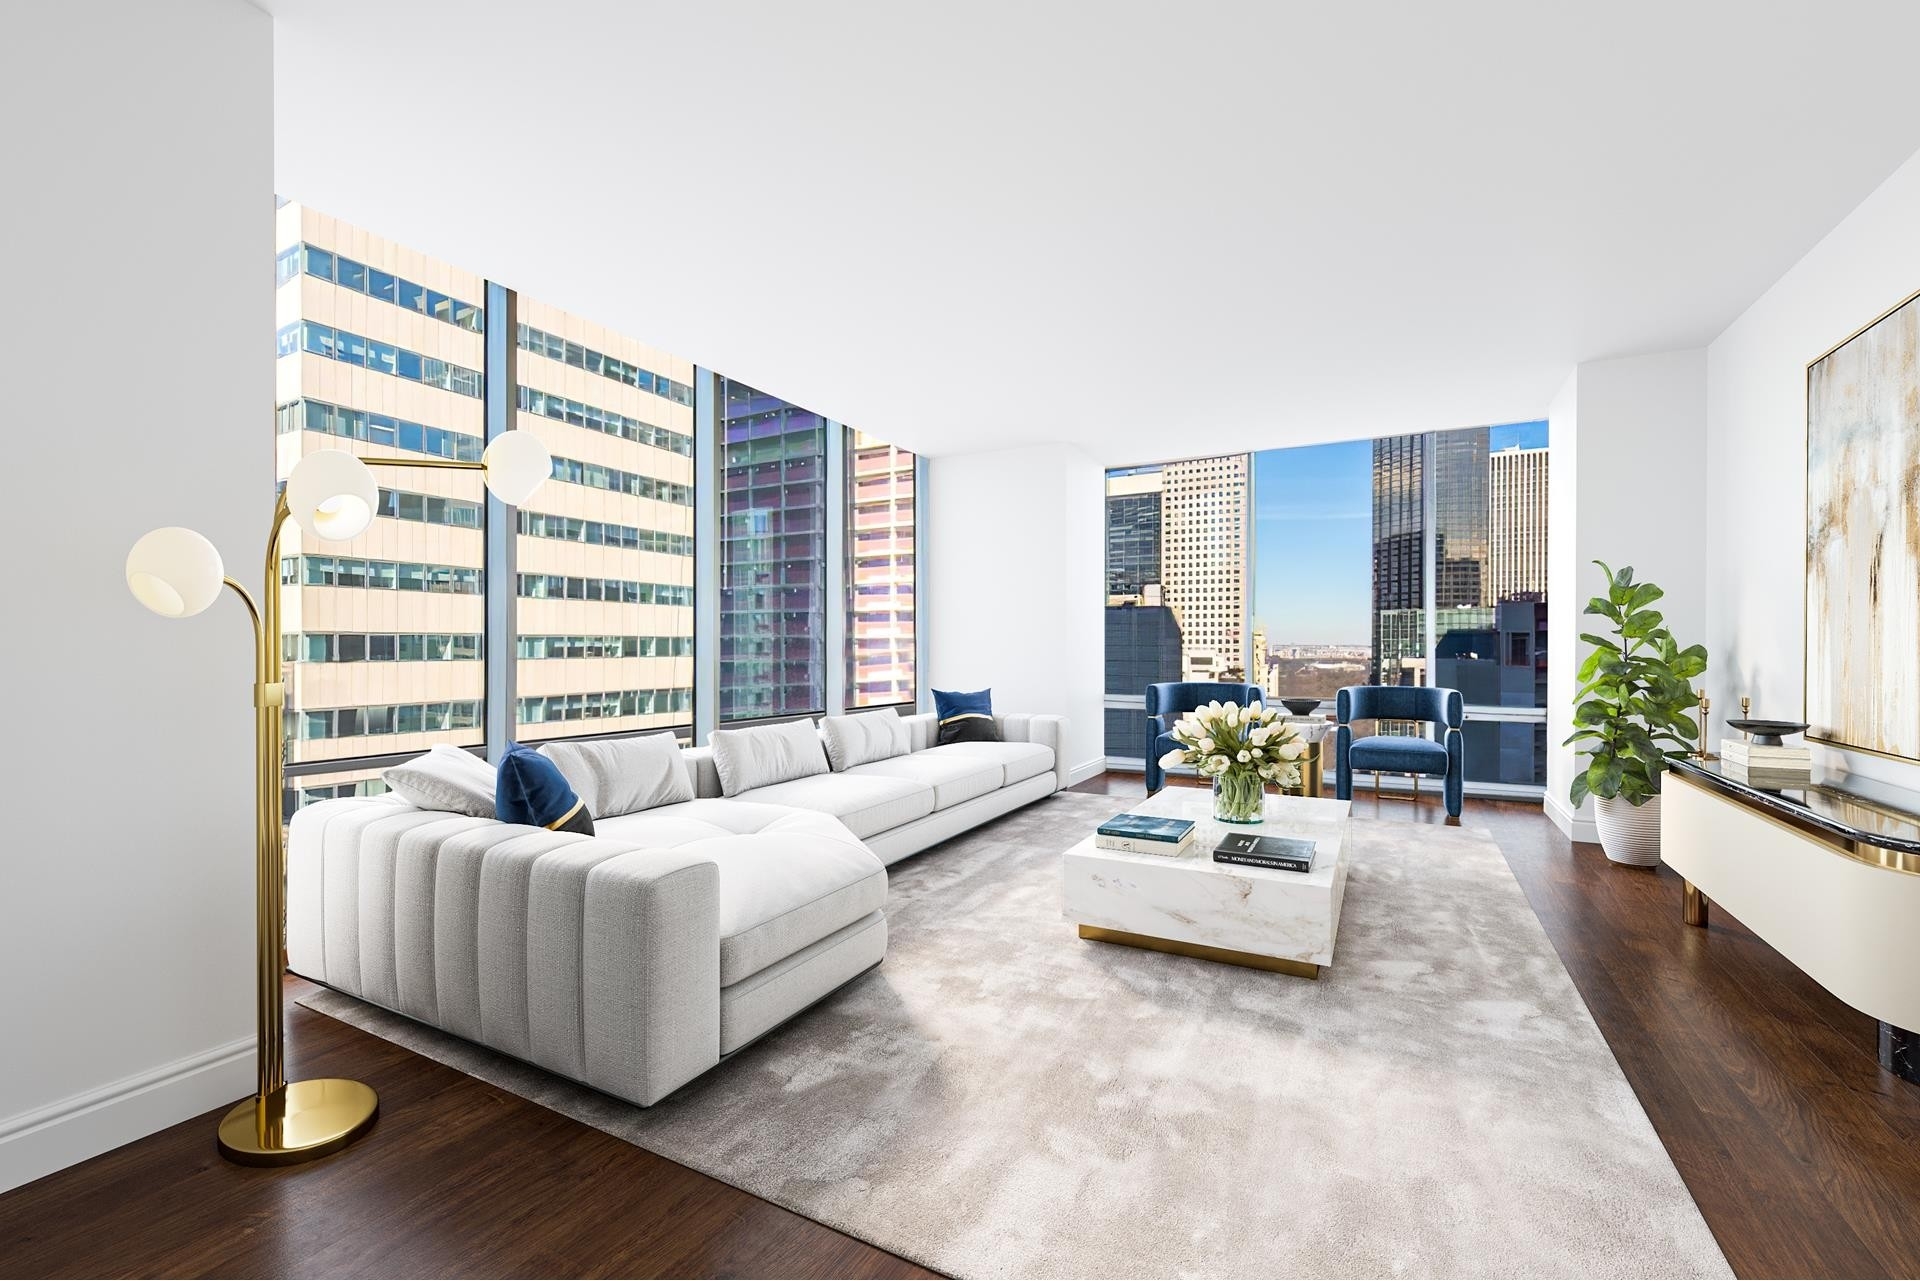 Condominium for Sale at Olympic Tower, 641 FIFTH AVE , 23A Turtle Bay, New York, NY 10022